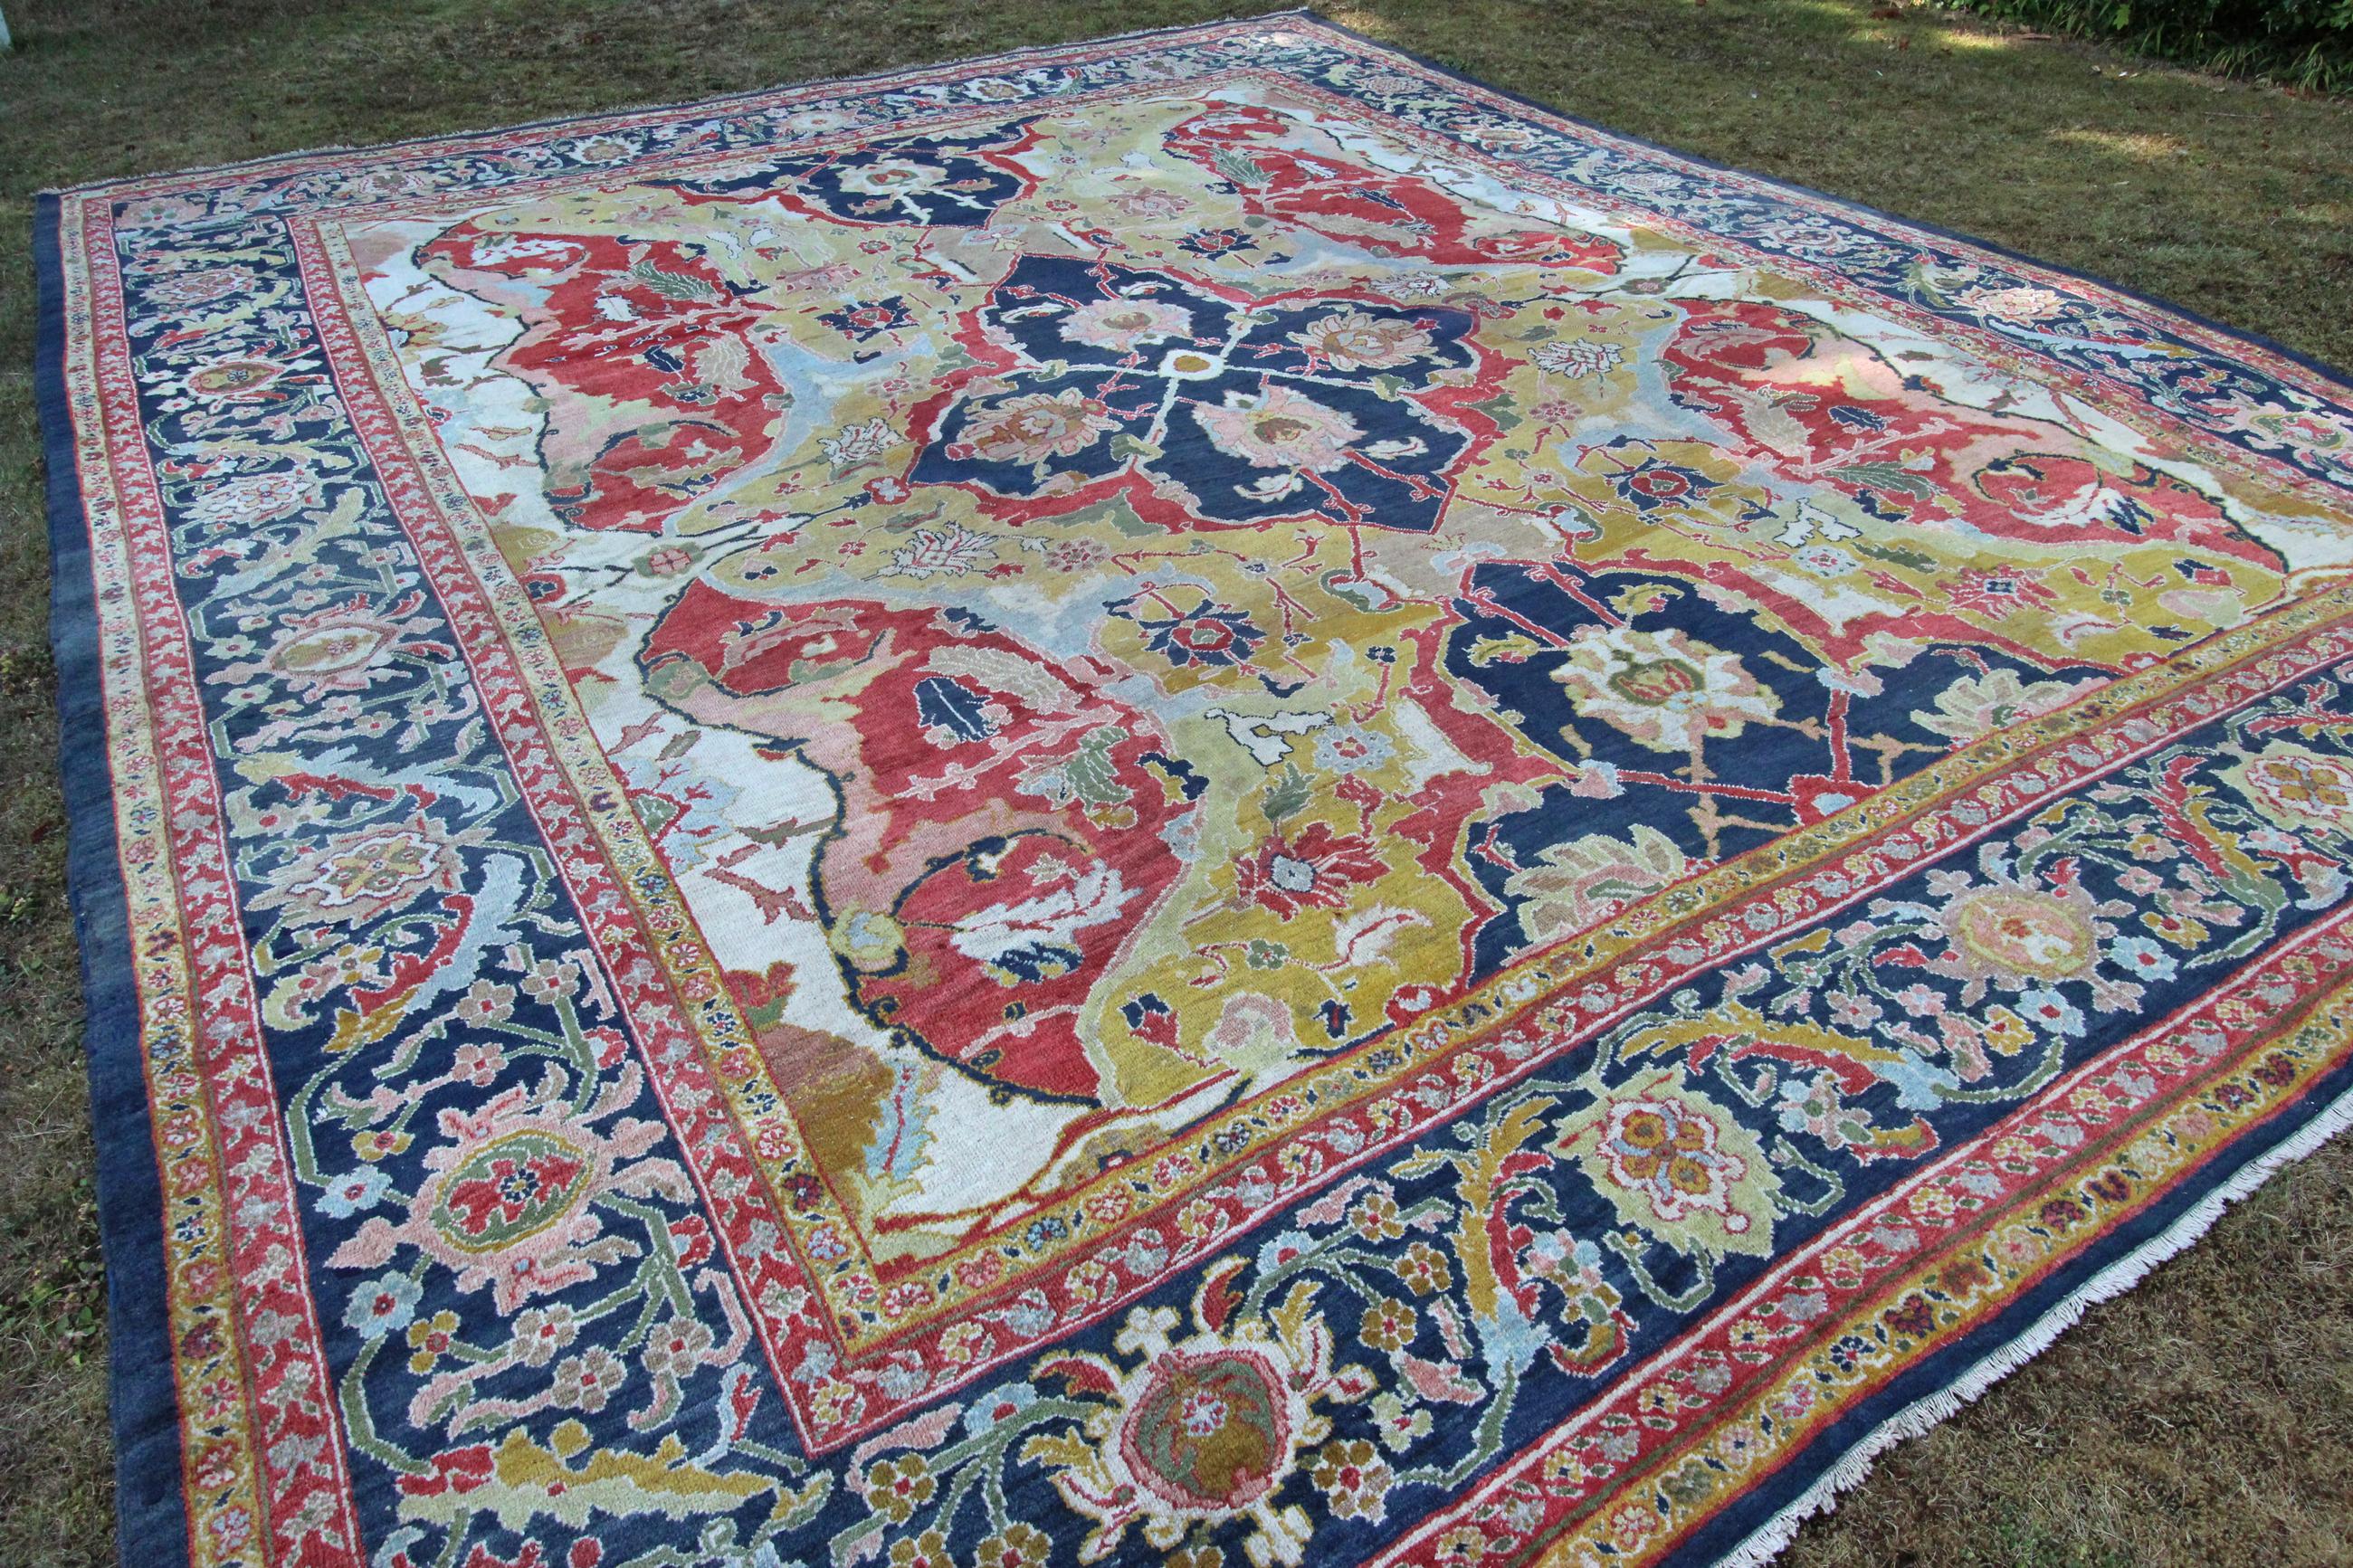 A very rare antique Ziegler carpet from the famed and world renown Ziegler & Co workshop in Sultanabad, Persia dating from 1883-1890. The reason this carpet is rarer than most antique Ziegler's is the design is a copy of a 17th century Polonaise